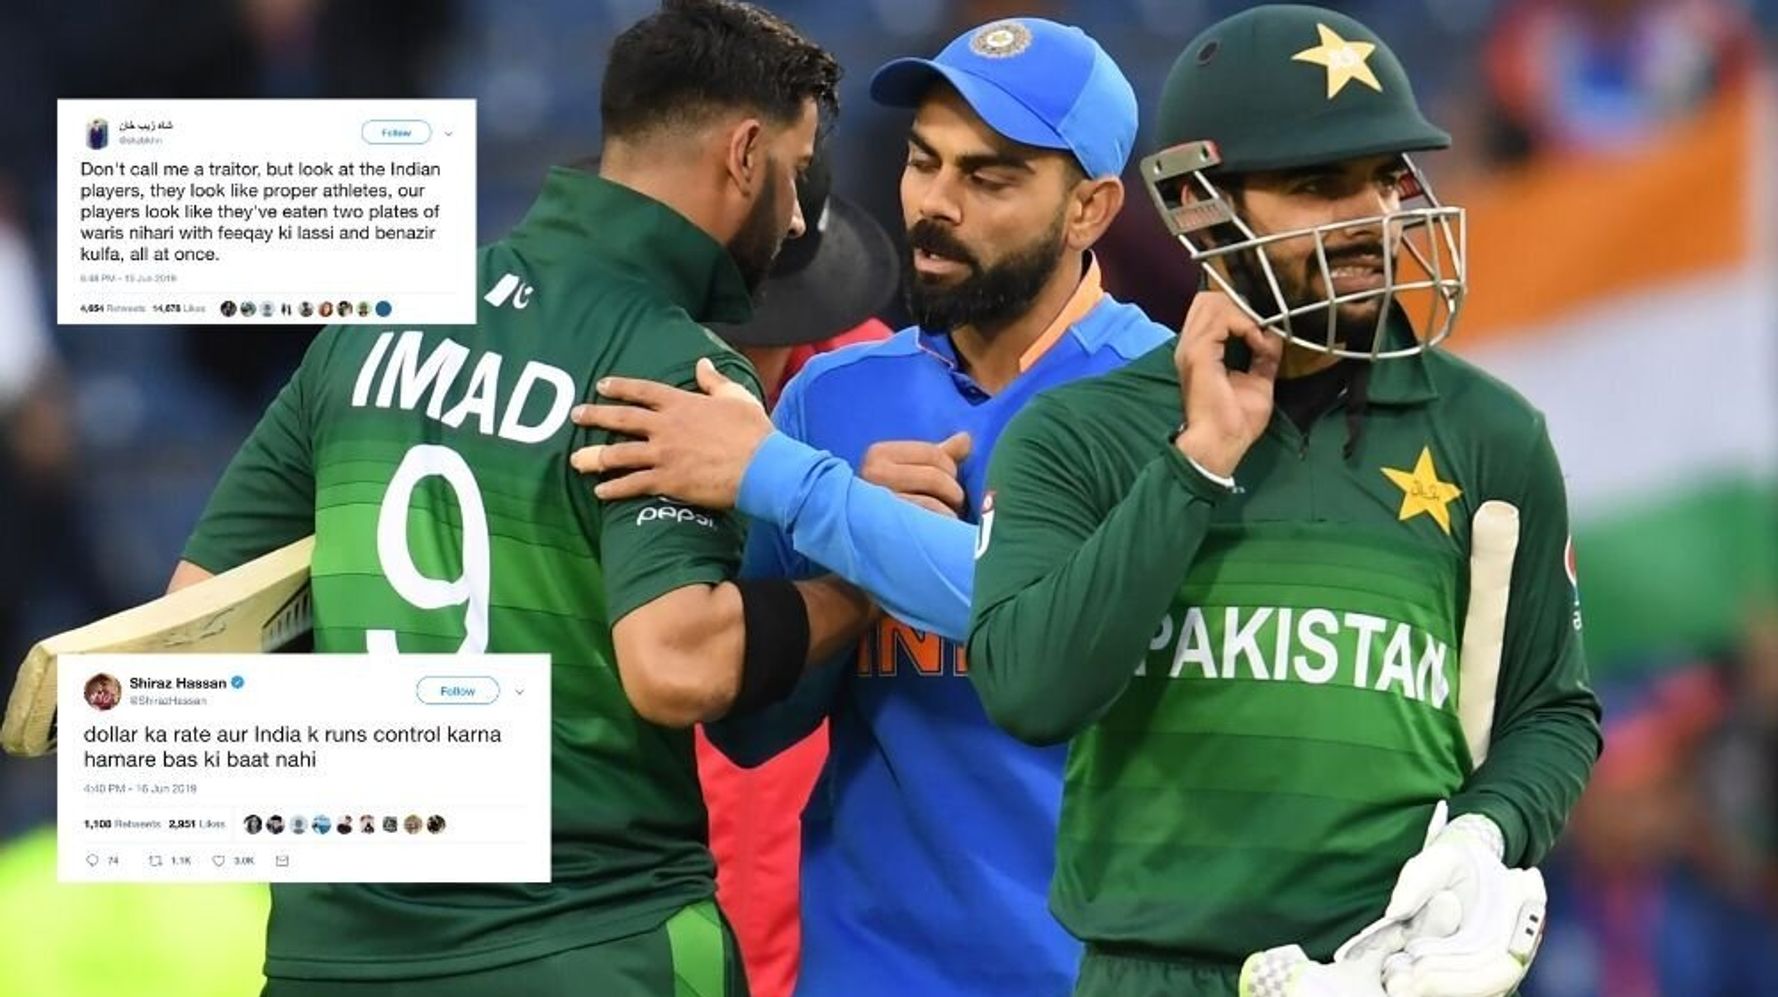 Pakistan Loses India Match, But Wins On Twitter | HuffPost News